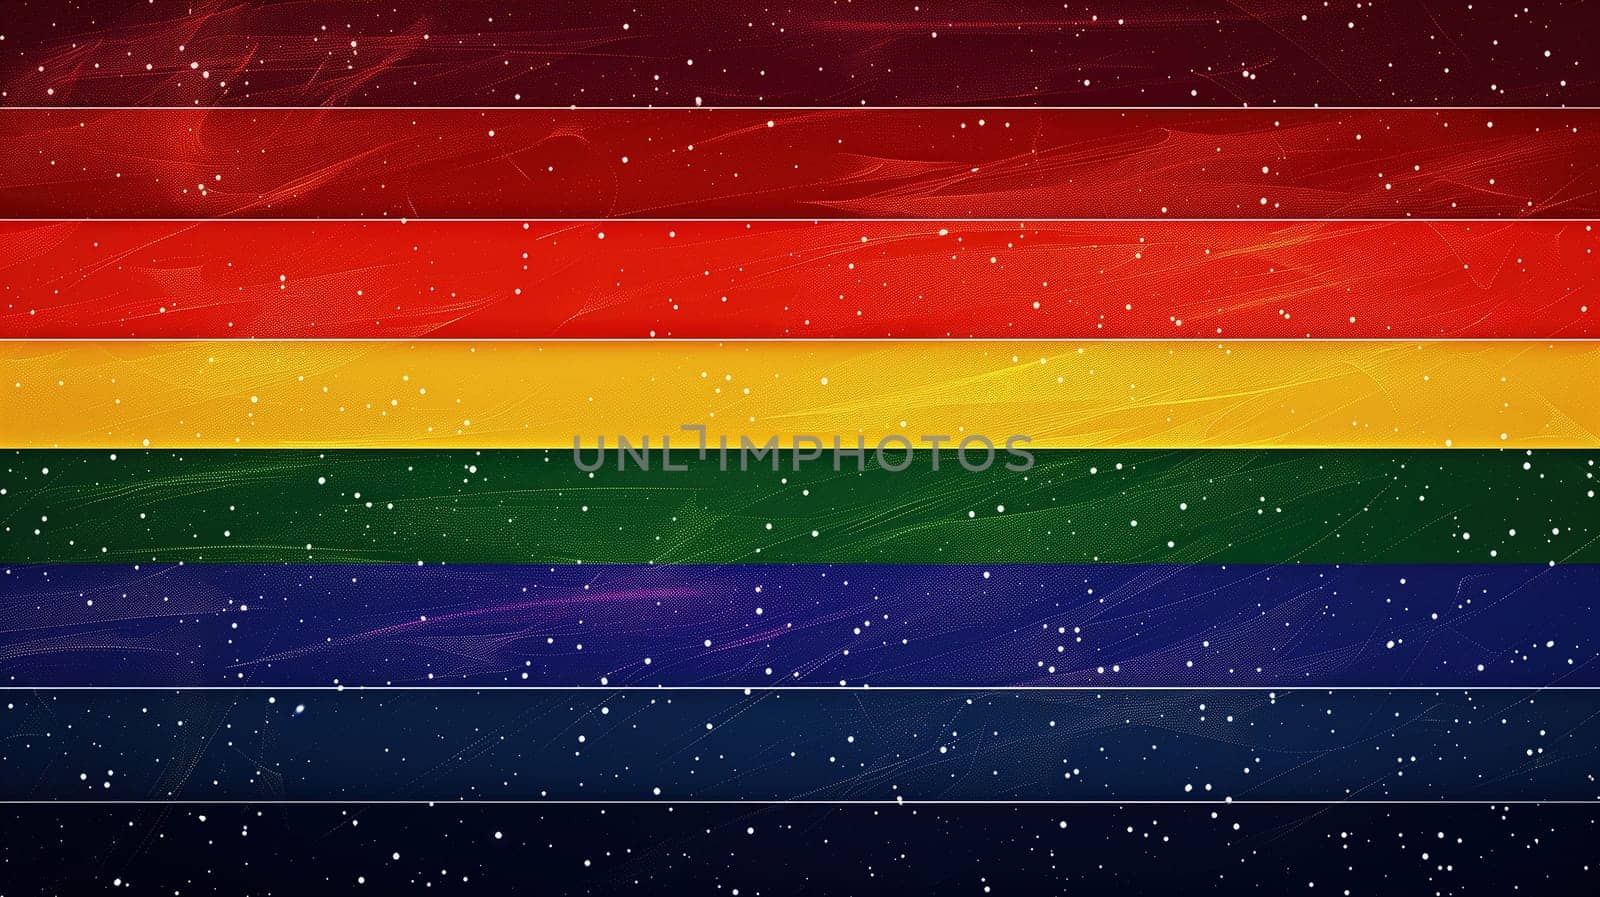 A colorful representation of the LGBT pride flag with the six familiar rainbow stripes set against a cosmic, star-studded background, symbolizing unity and diversity within the cosmos.